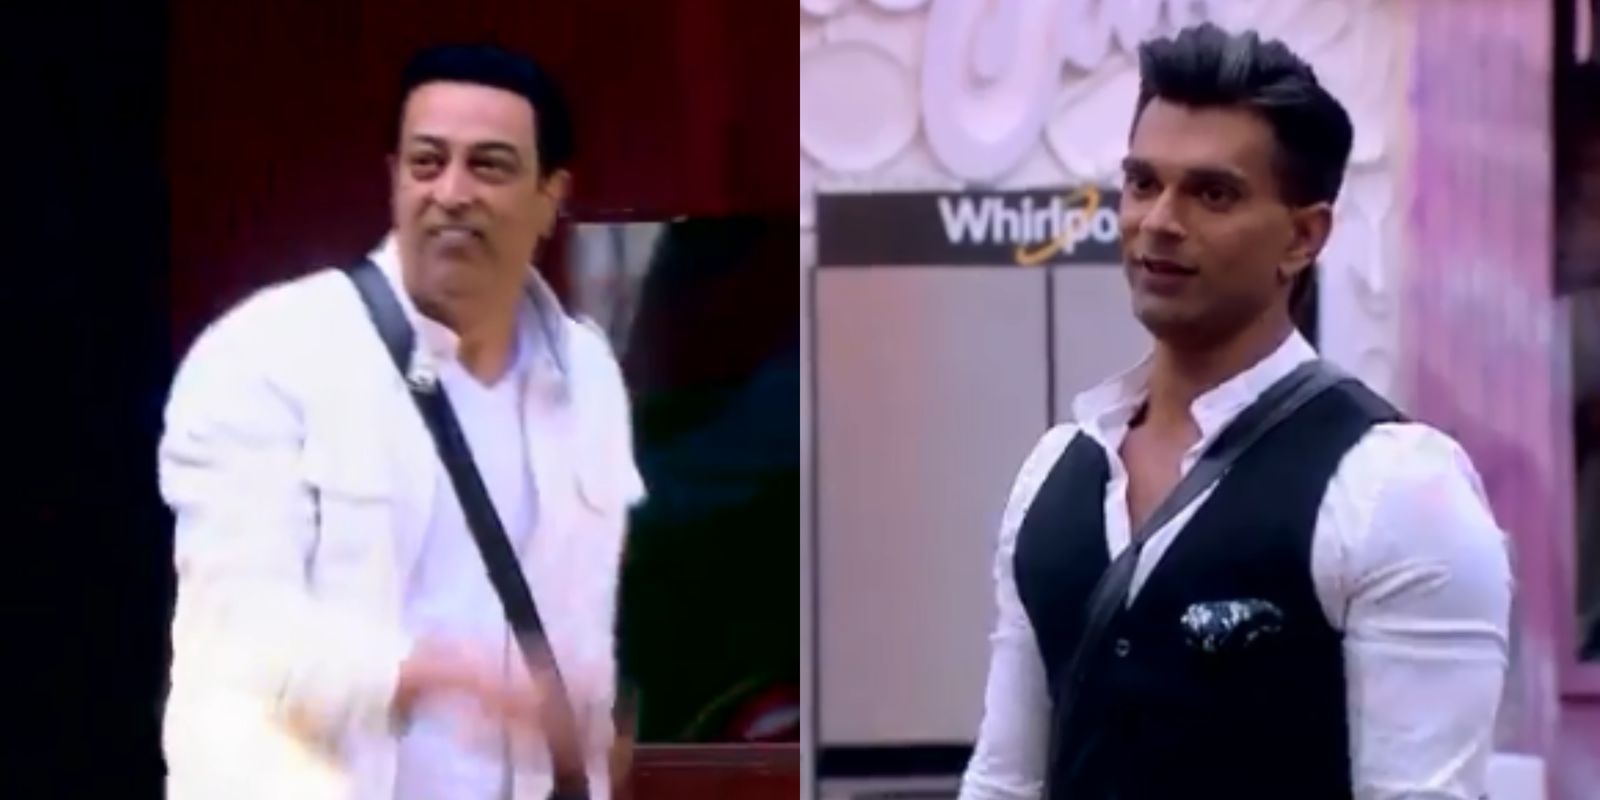 Bigg Boss 13 Preview: Karan Singh Grover, Vindu Dara Singh Enter The House To Give Contestants A Piece Of Their Mind